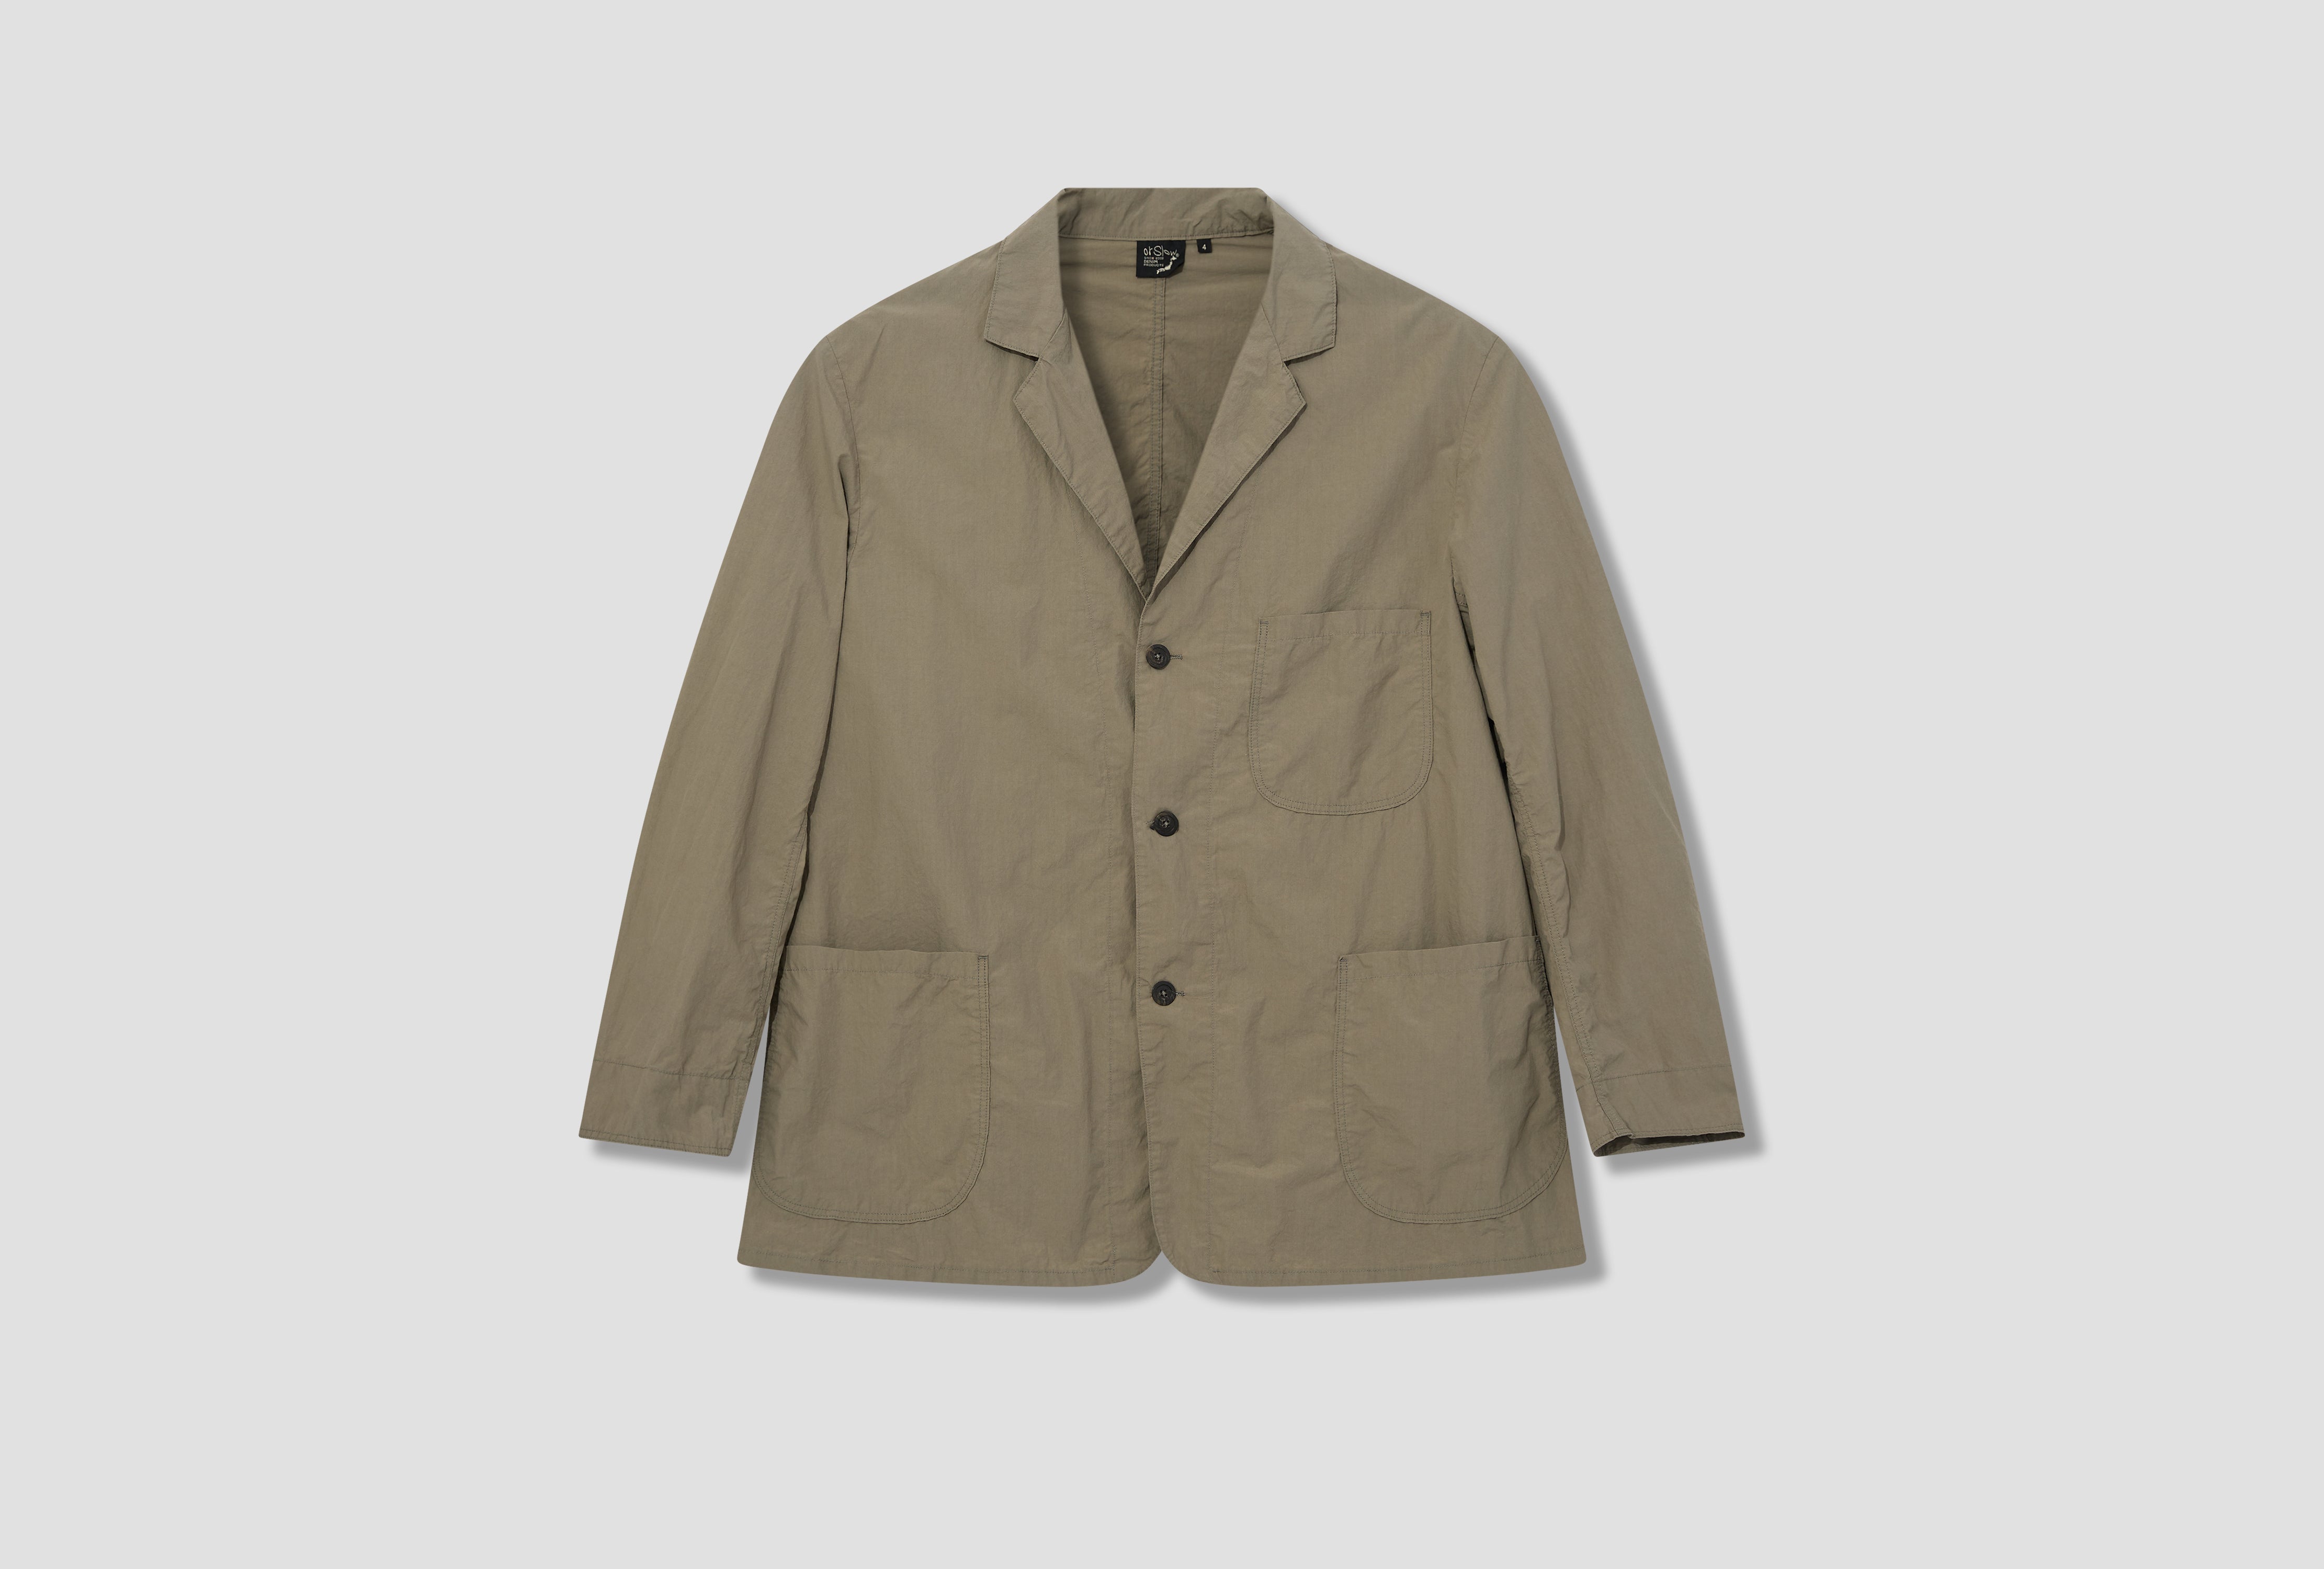 ENGINEERED GARMENTS BEDFORD JACKET - OLIVE COTTON RIPSTOP 23S1D005 